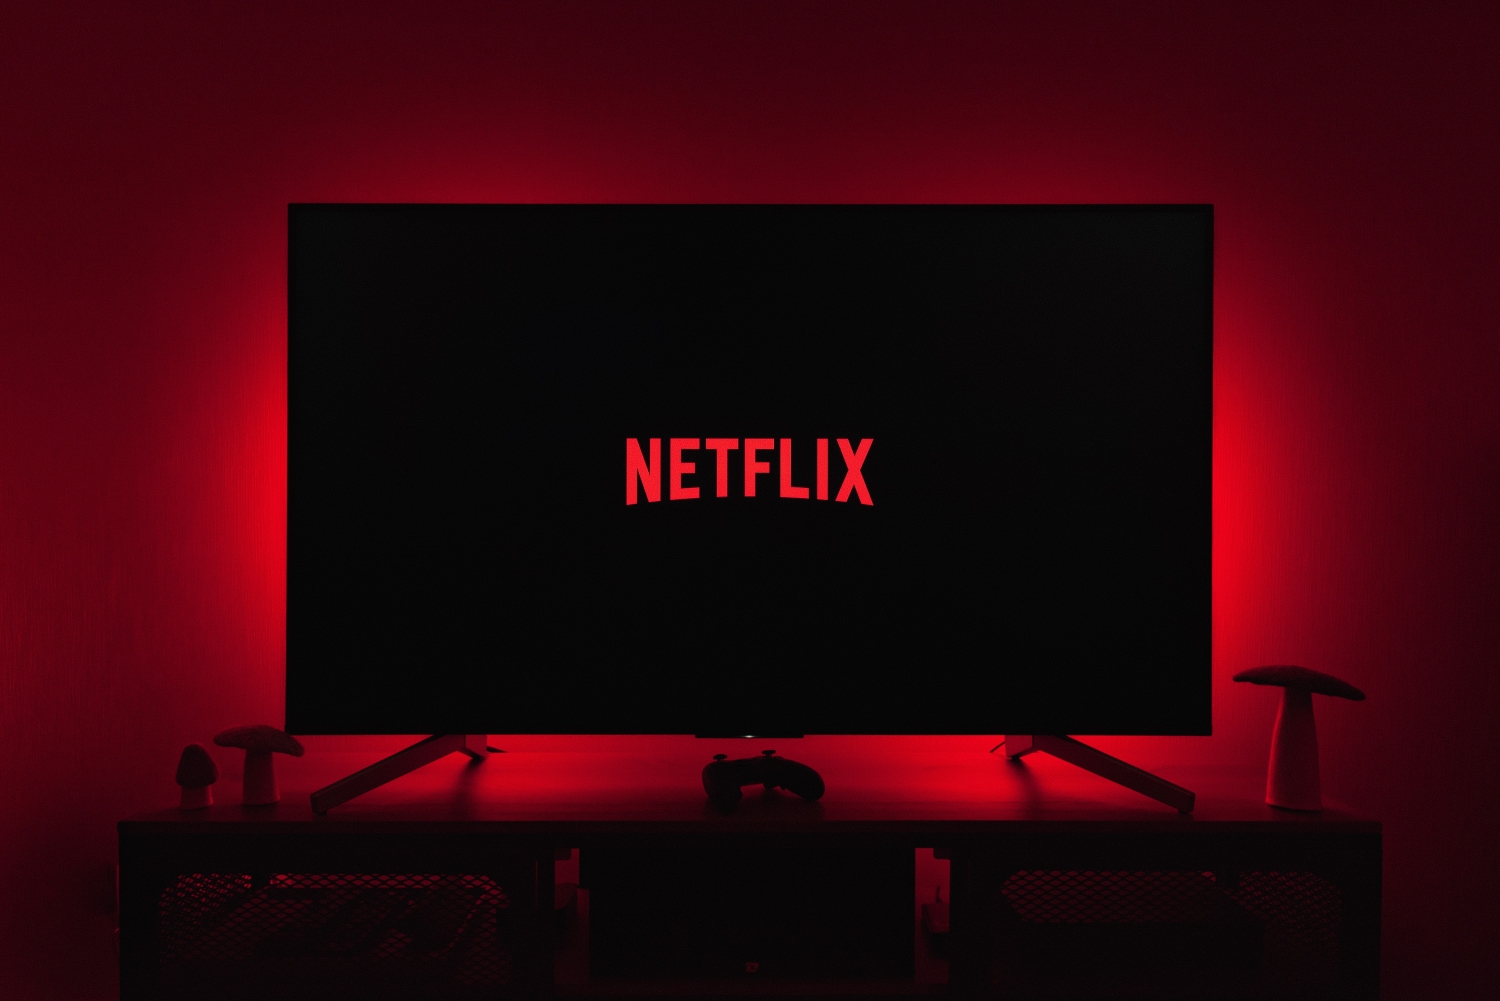 Record number of subscribers for Netflix in the US: new policy implementation works